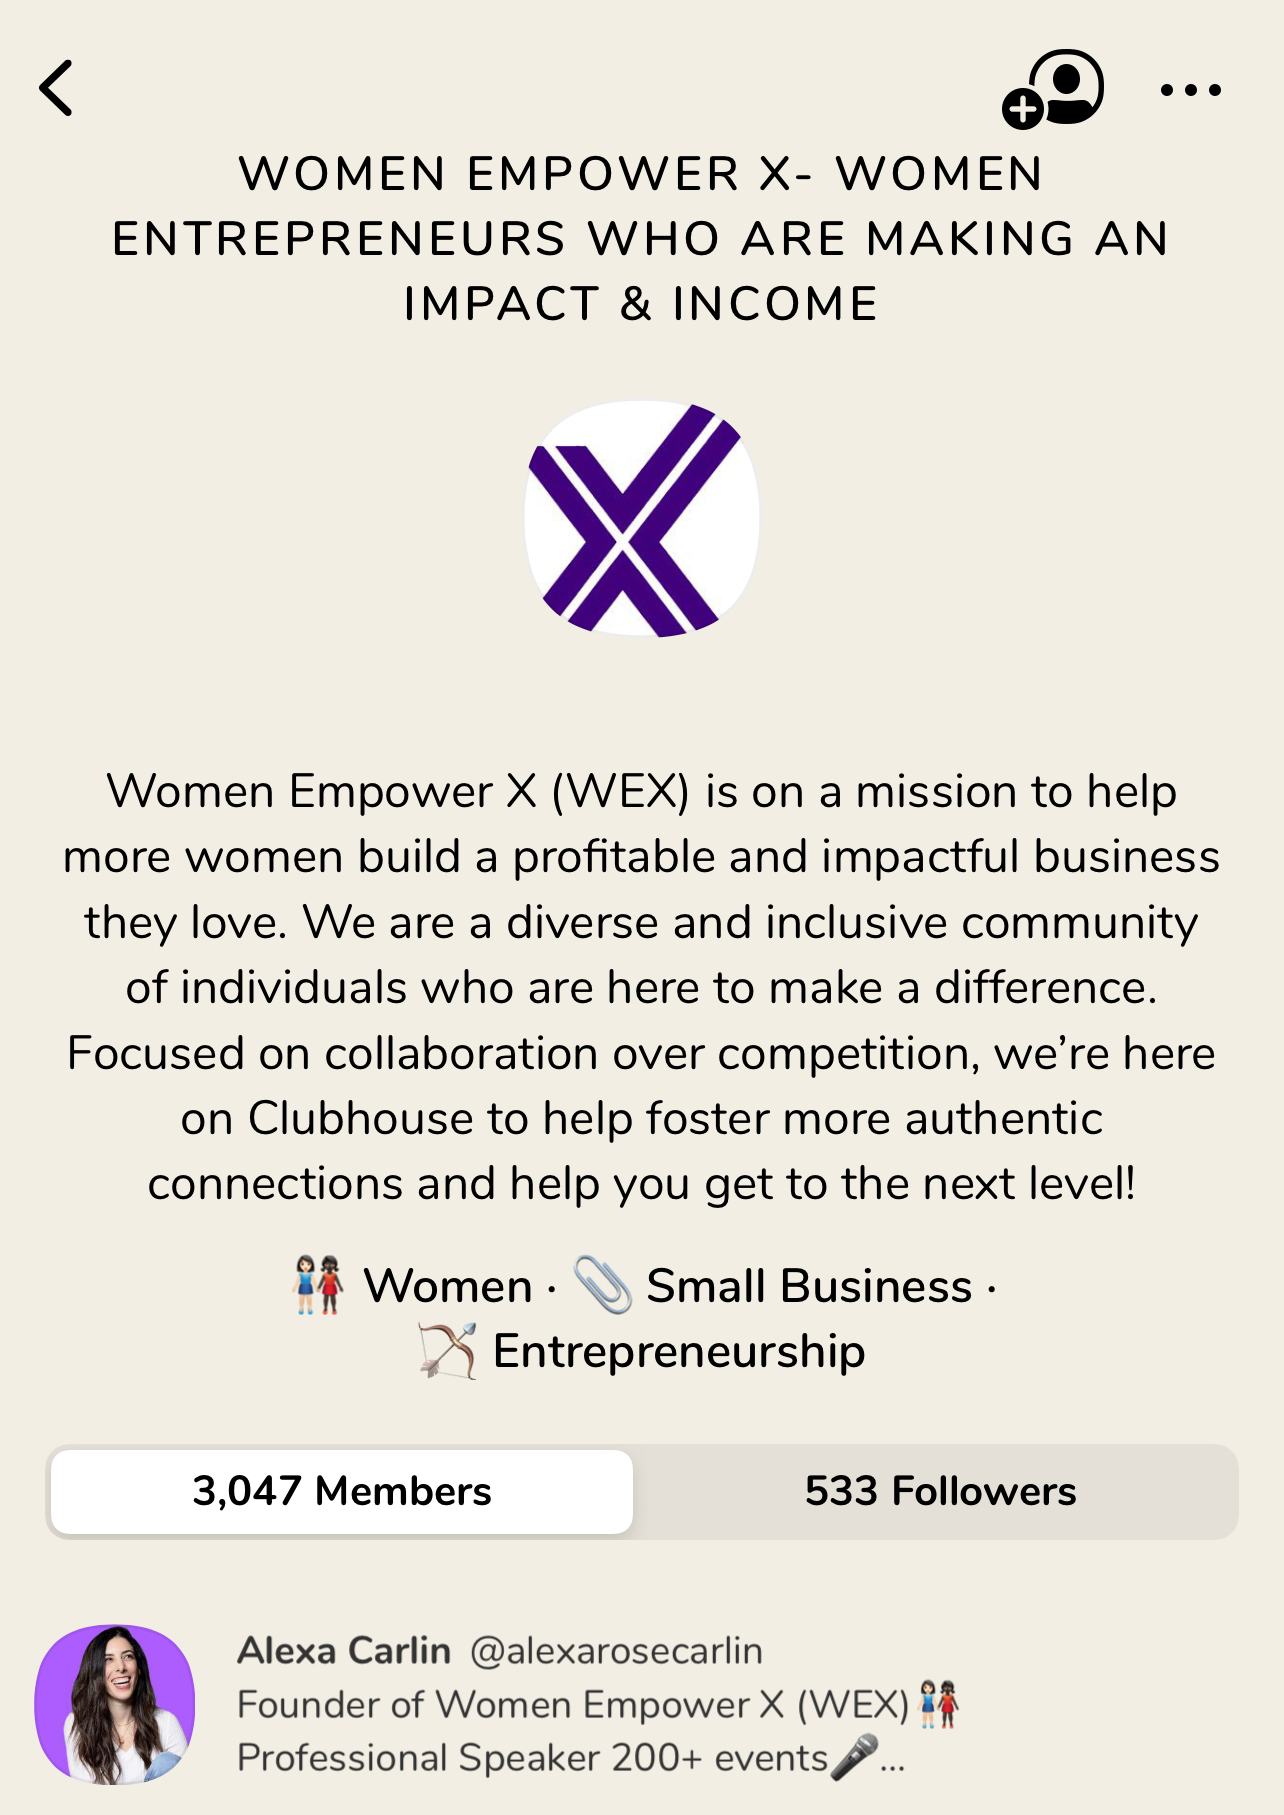 Carlin says her club for women entrepreneurs grew to more than 3,000 members in just one week.